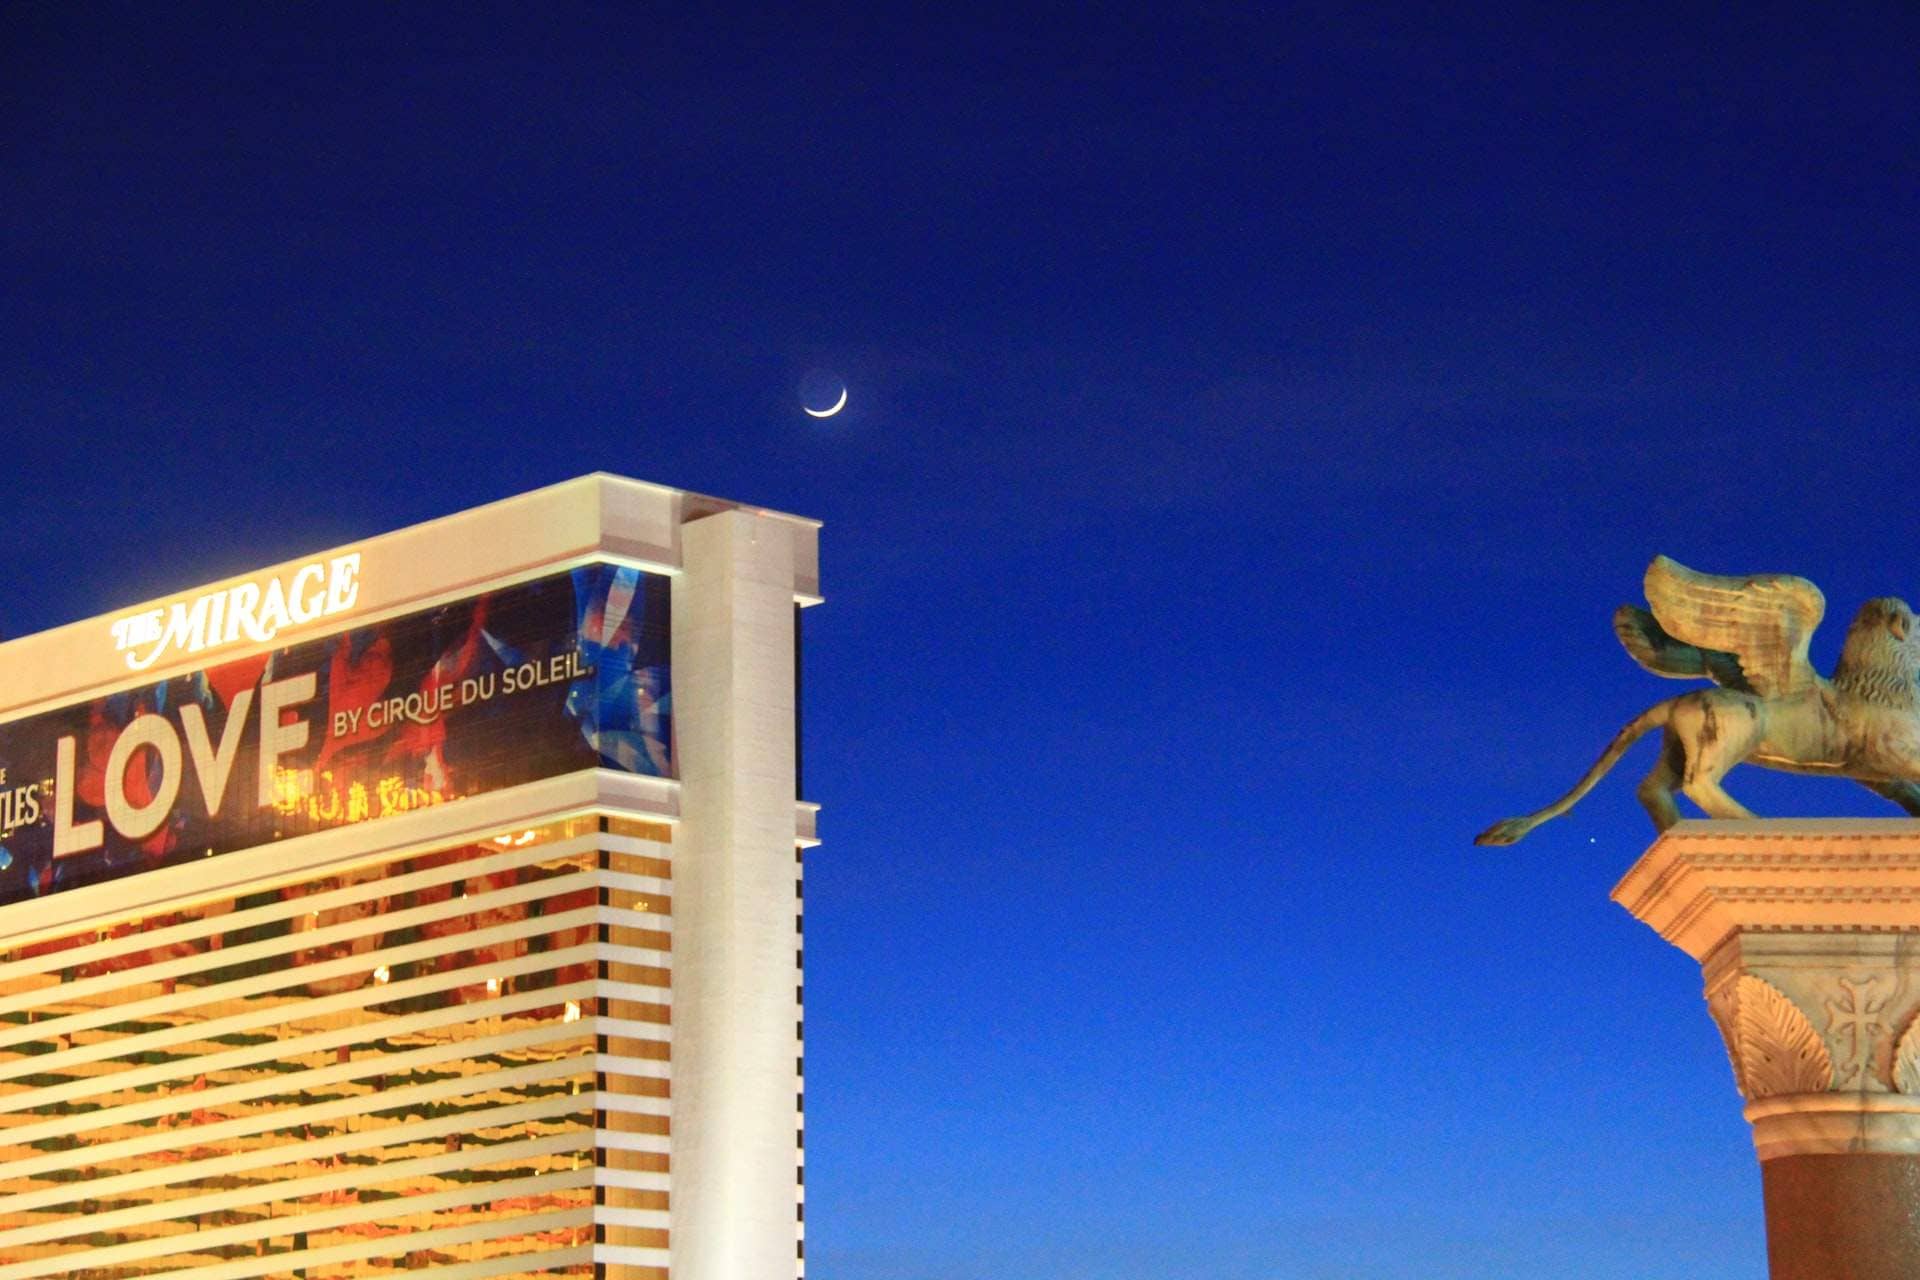 You are currently viewing Hard Rock Hotel Buys the Mirage for $1.075 Billion Makeover Project